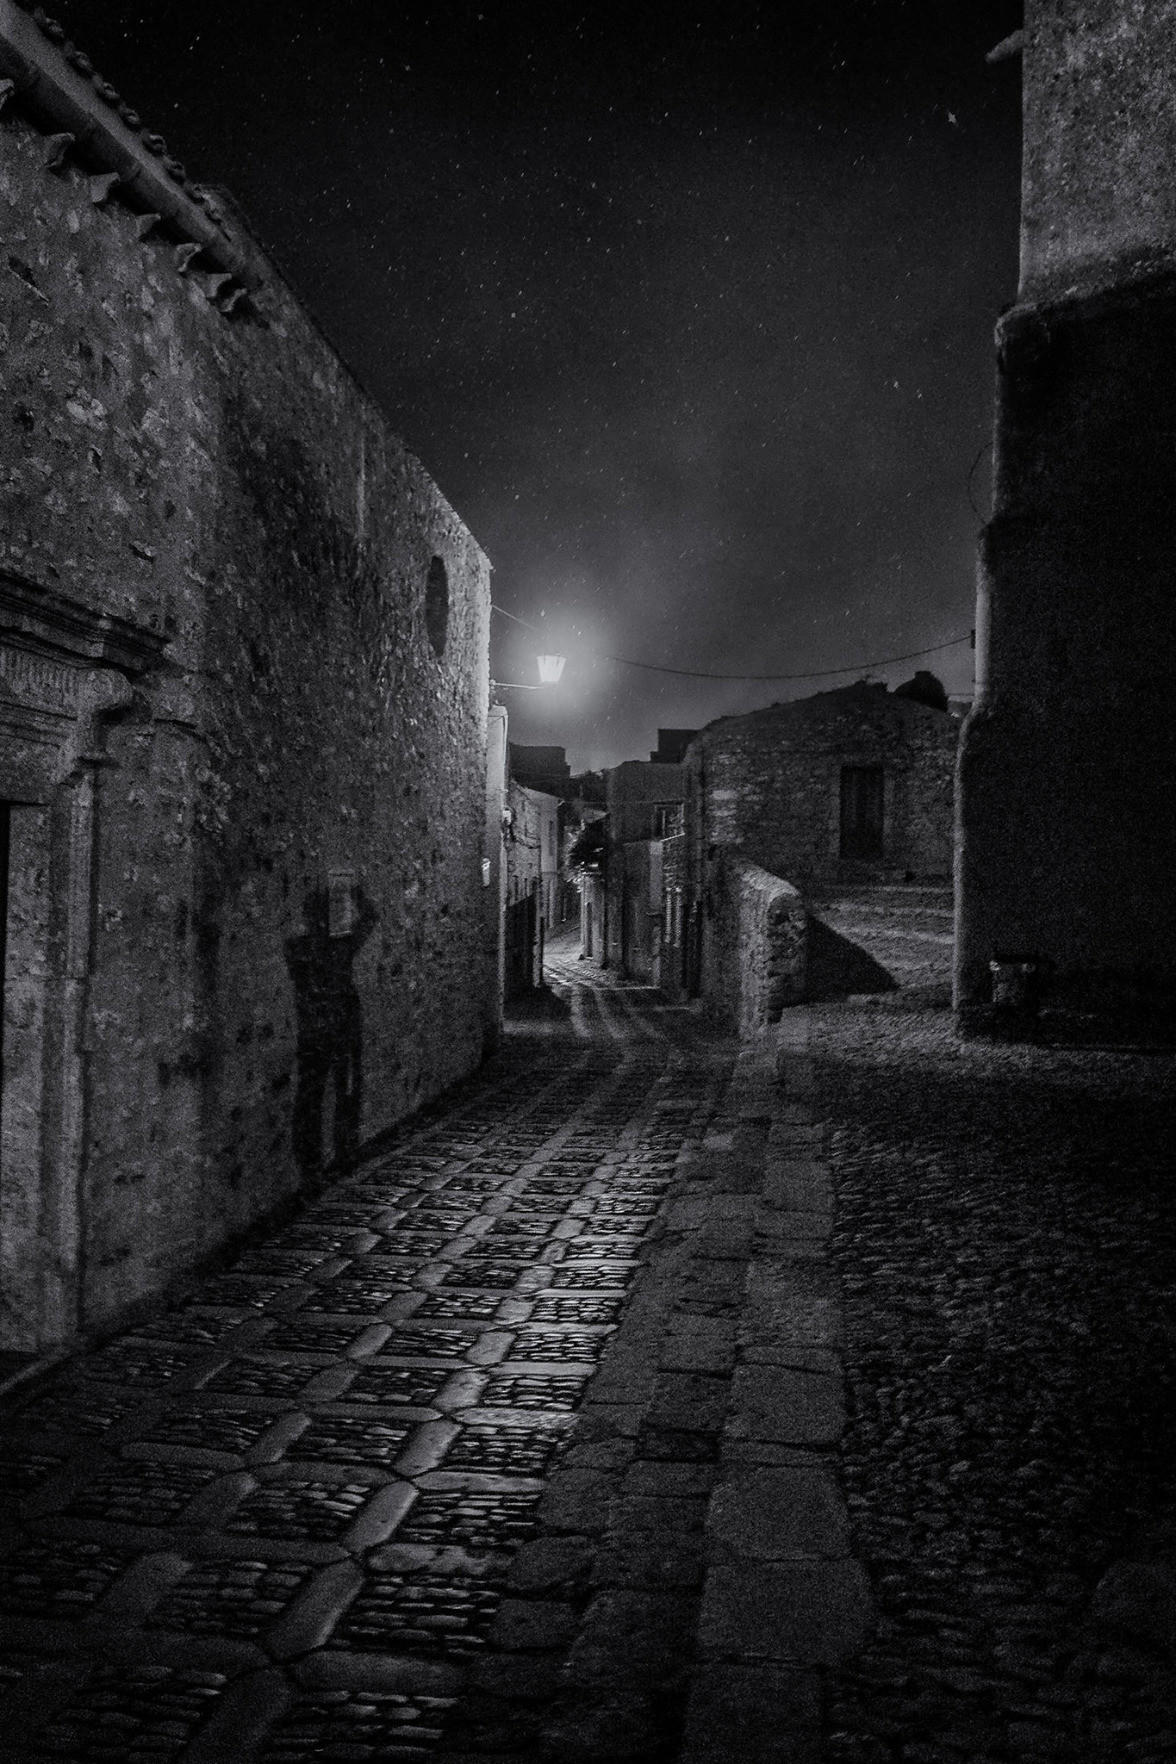 Dark cobblestone street in the Sicilian town of Erice with the photographer's shadow projected against the wall of a stone building.